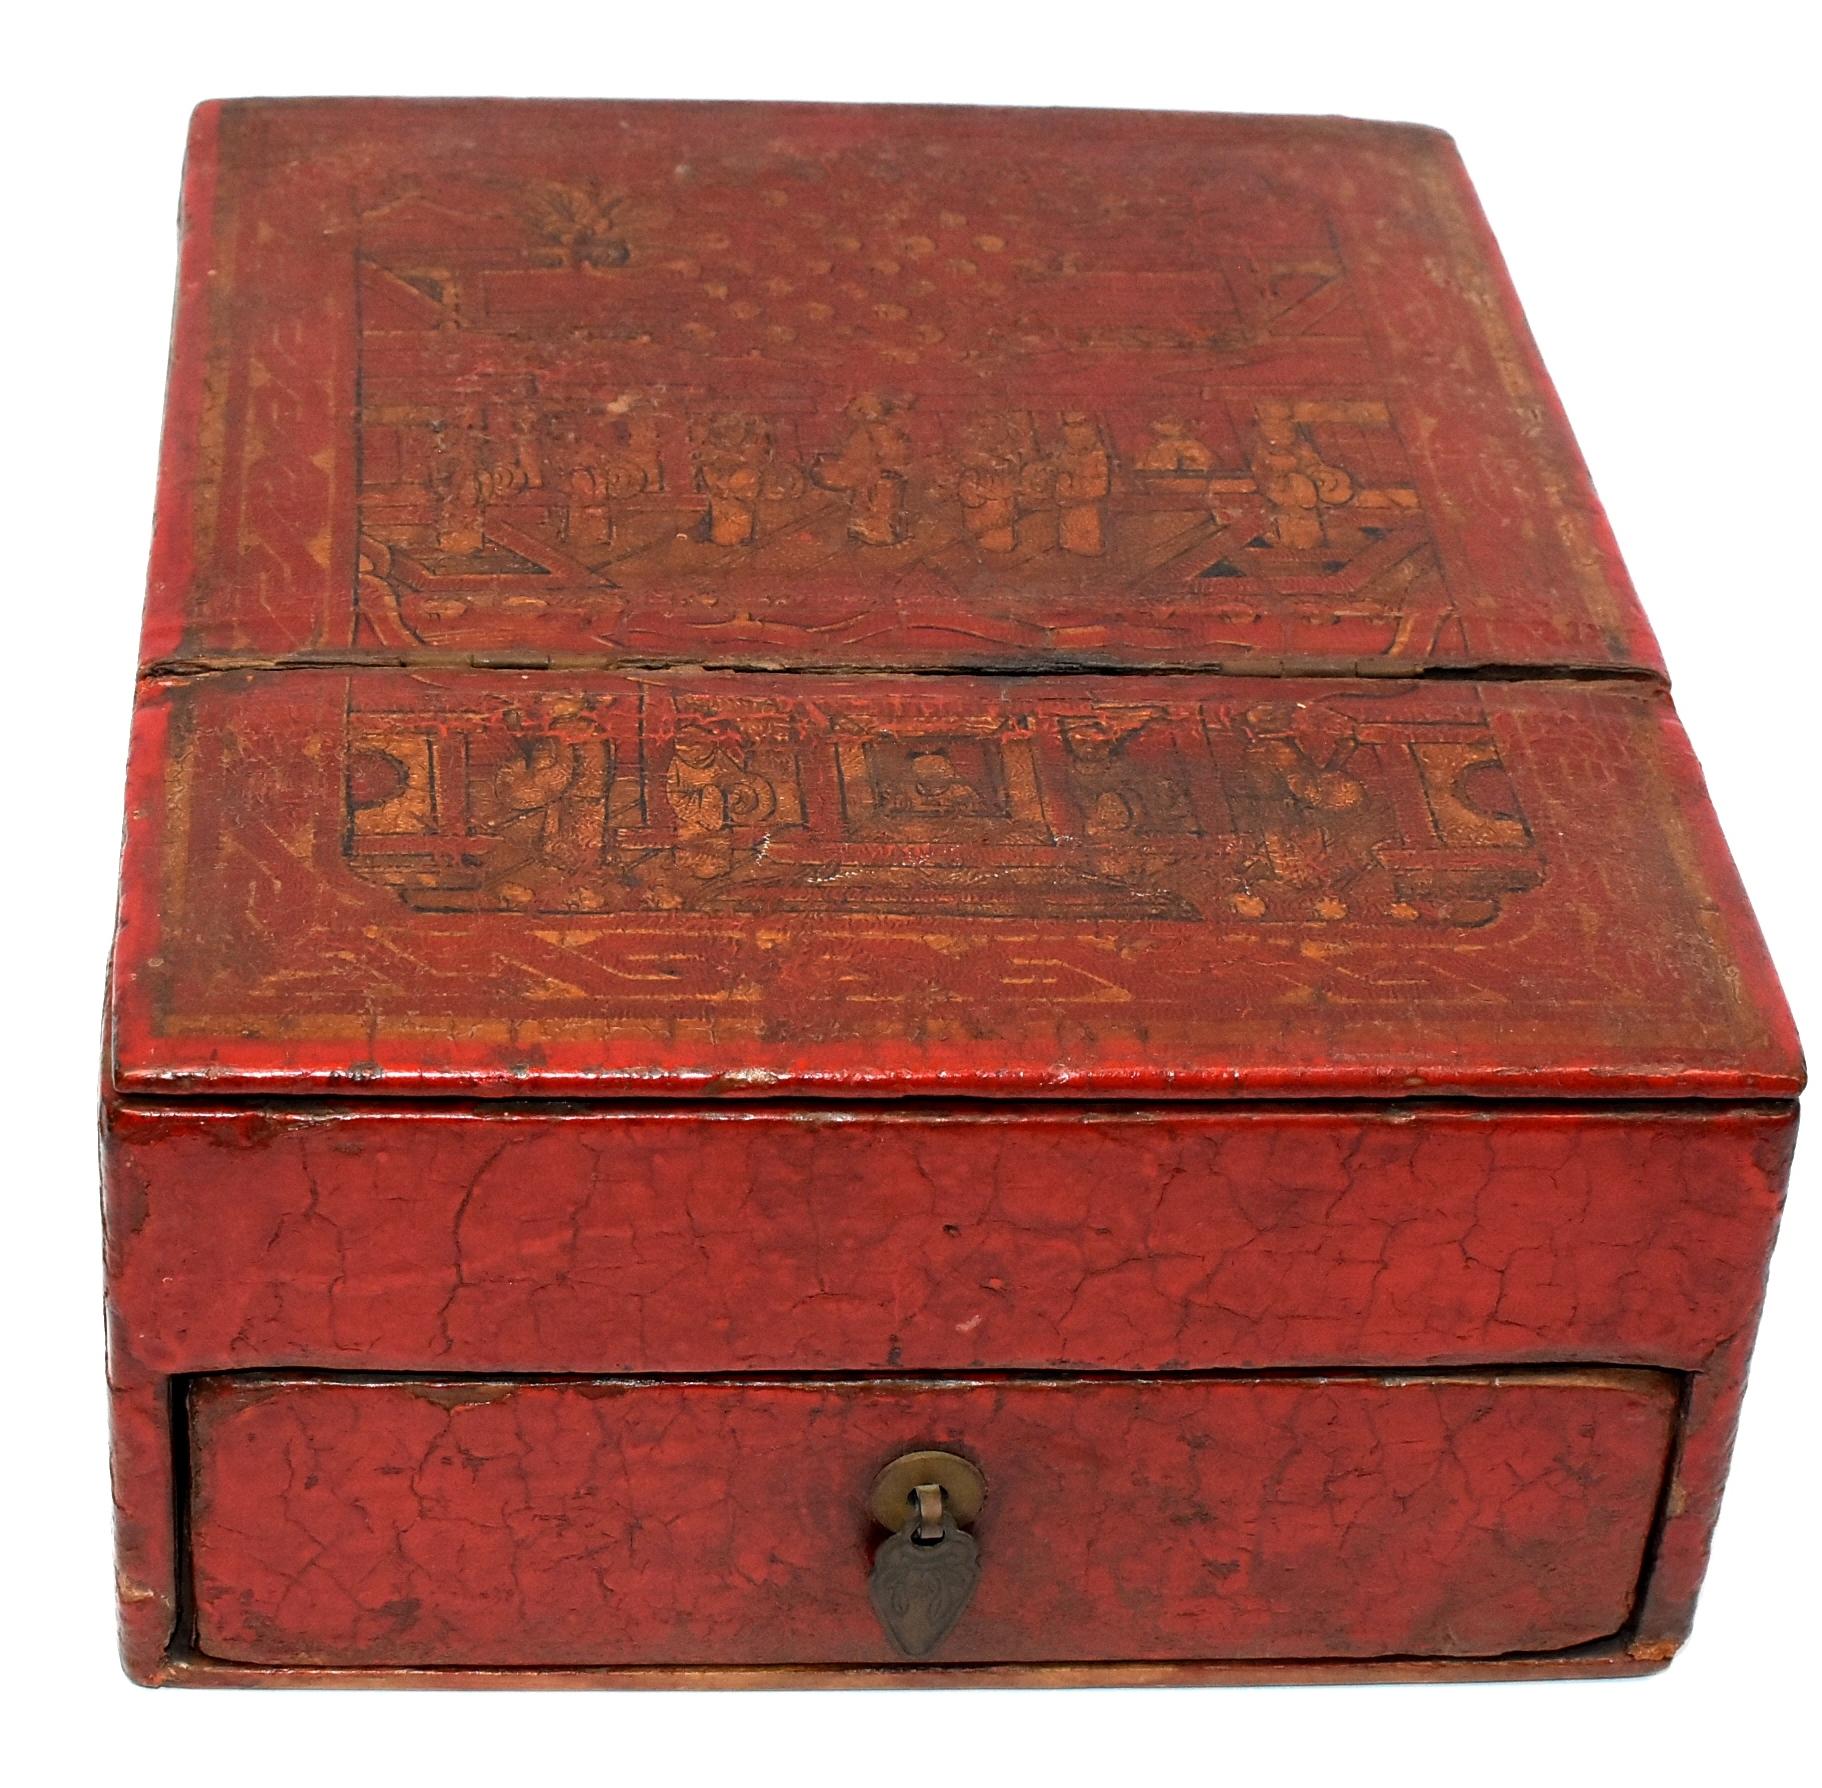 A beautiful old box made of wood and leather. The box has a painted top featuring hand painted scene of a happy gathering at a private estate. It has gilded figures and detailed depictions of architectures. One side of the box has gilded lotus, the